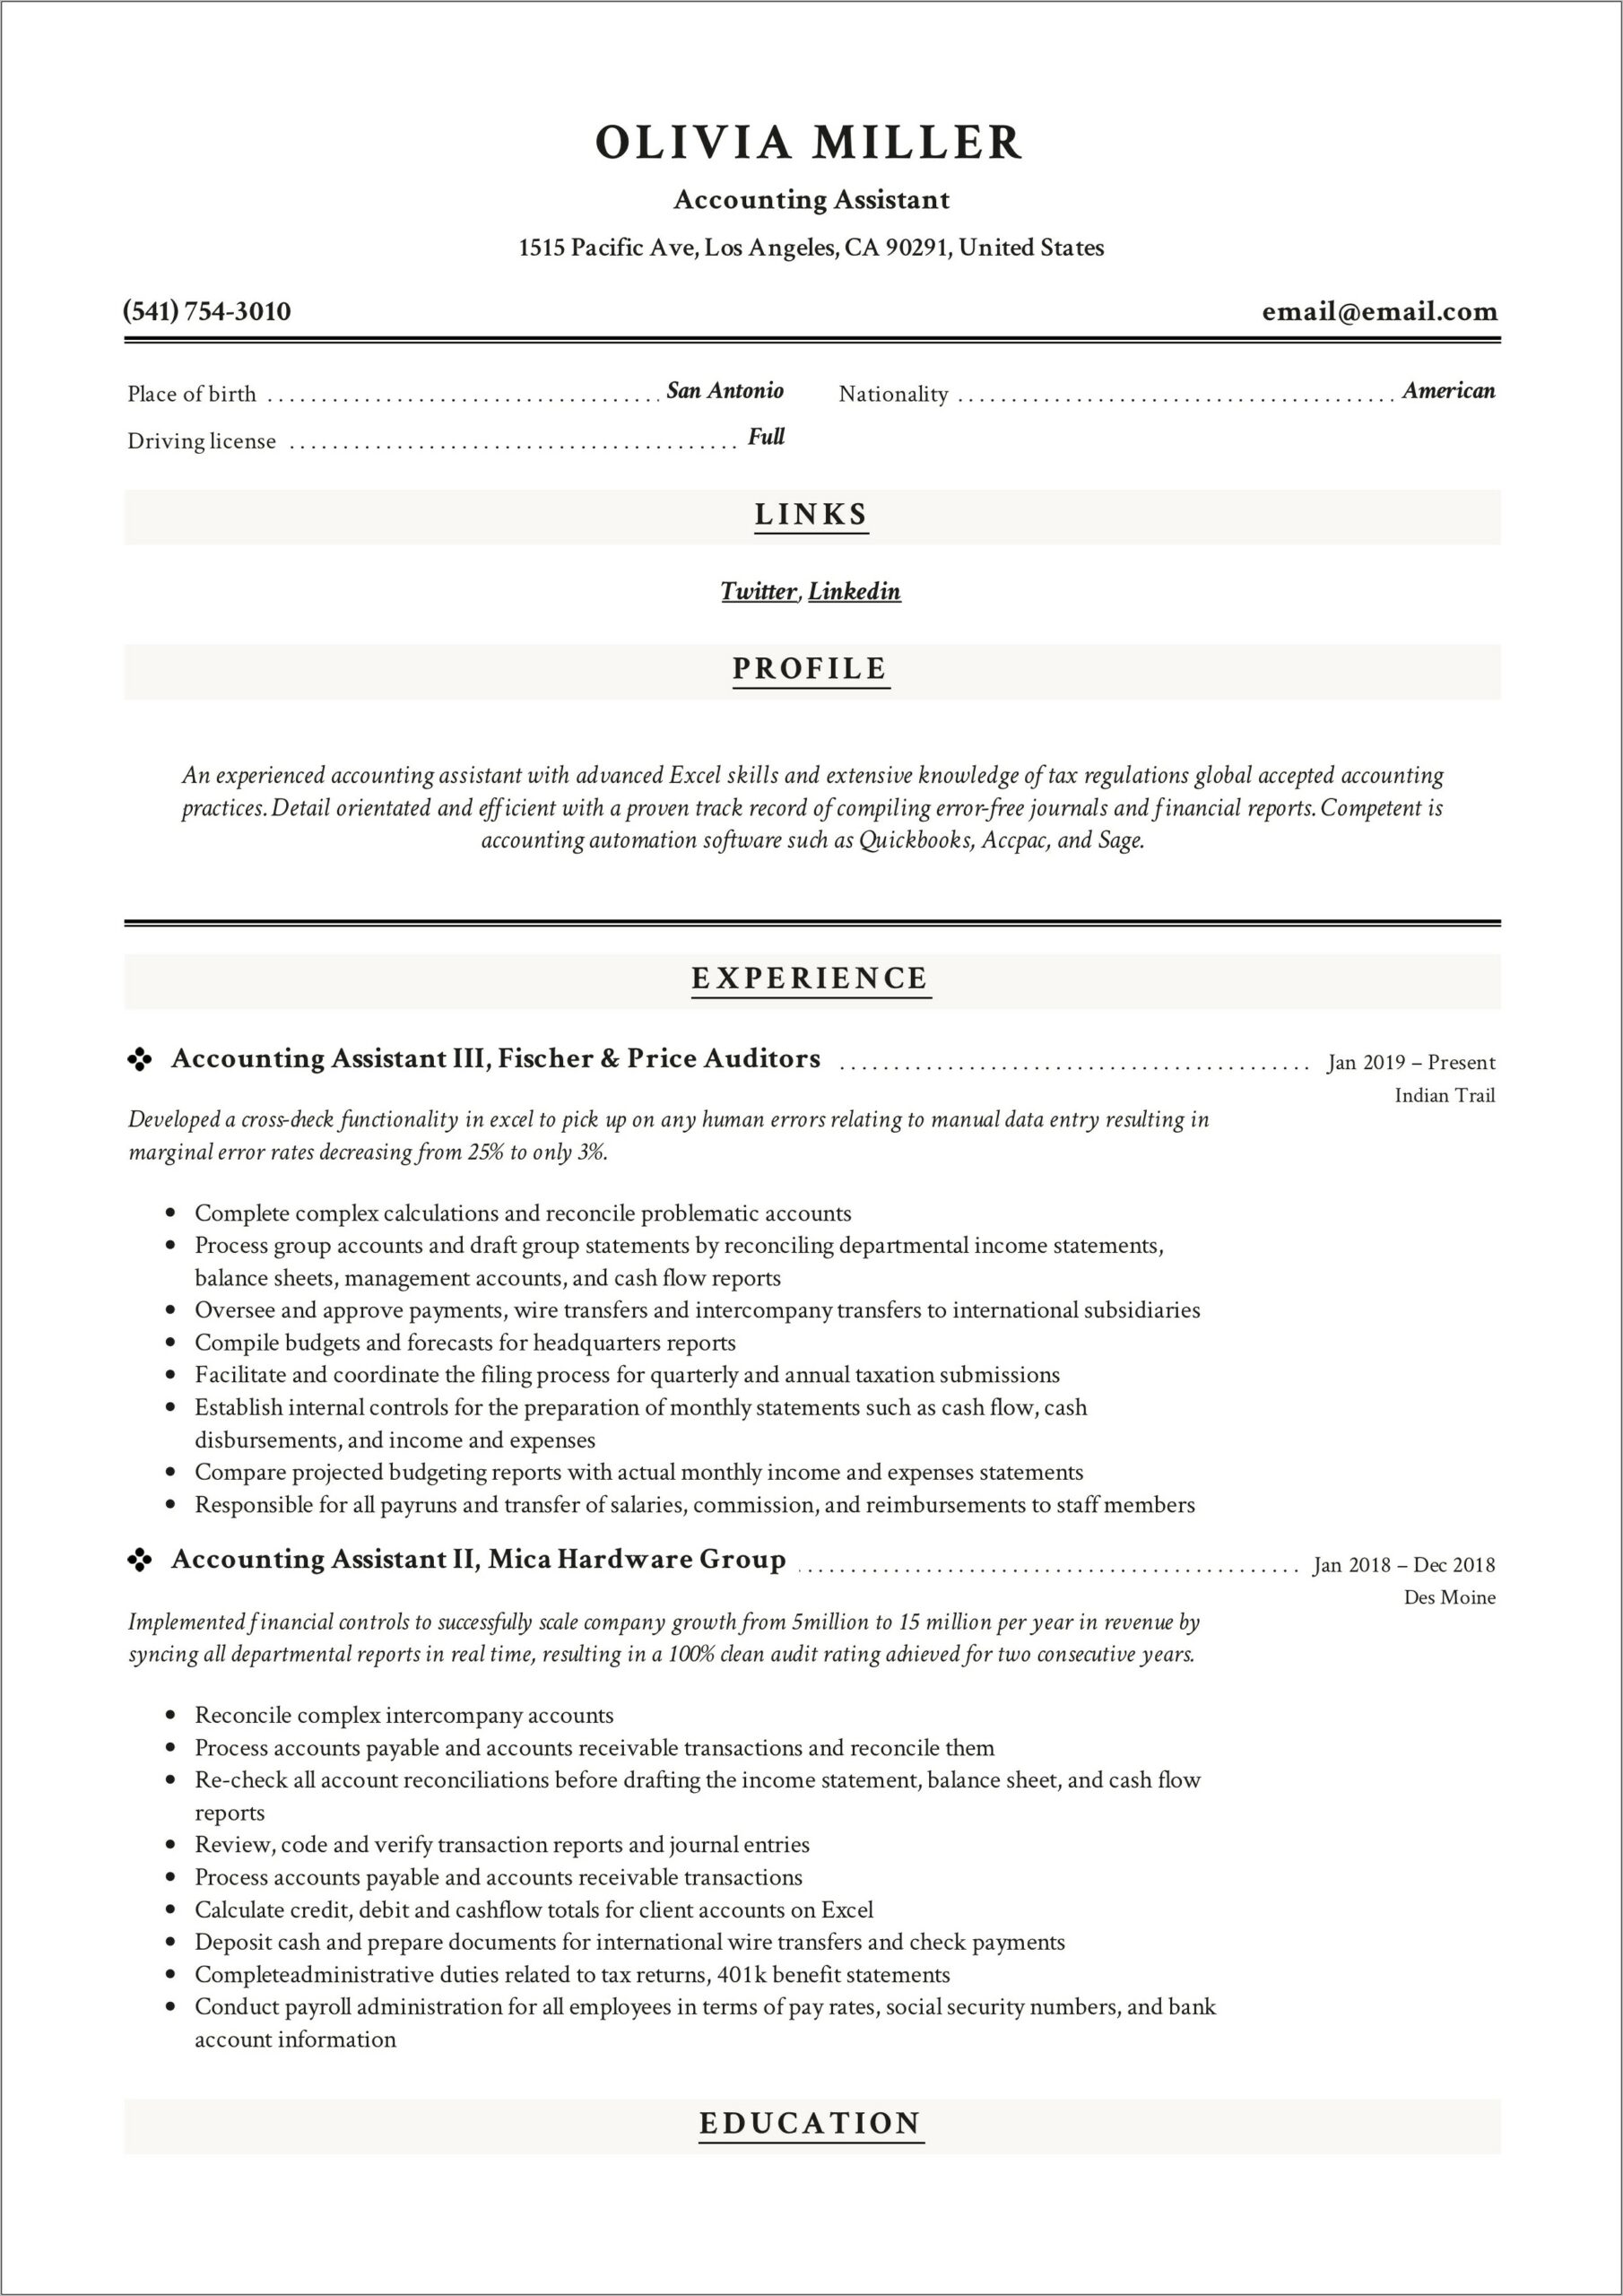 Examples Of Objectives For Resumes In Accounting